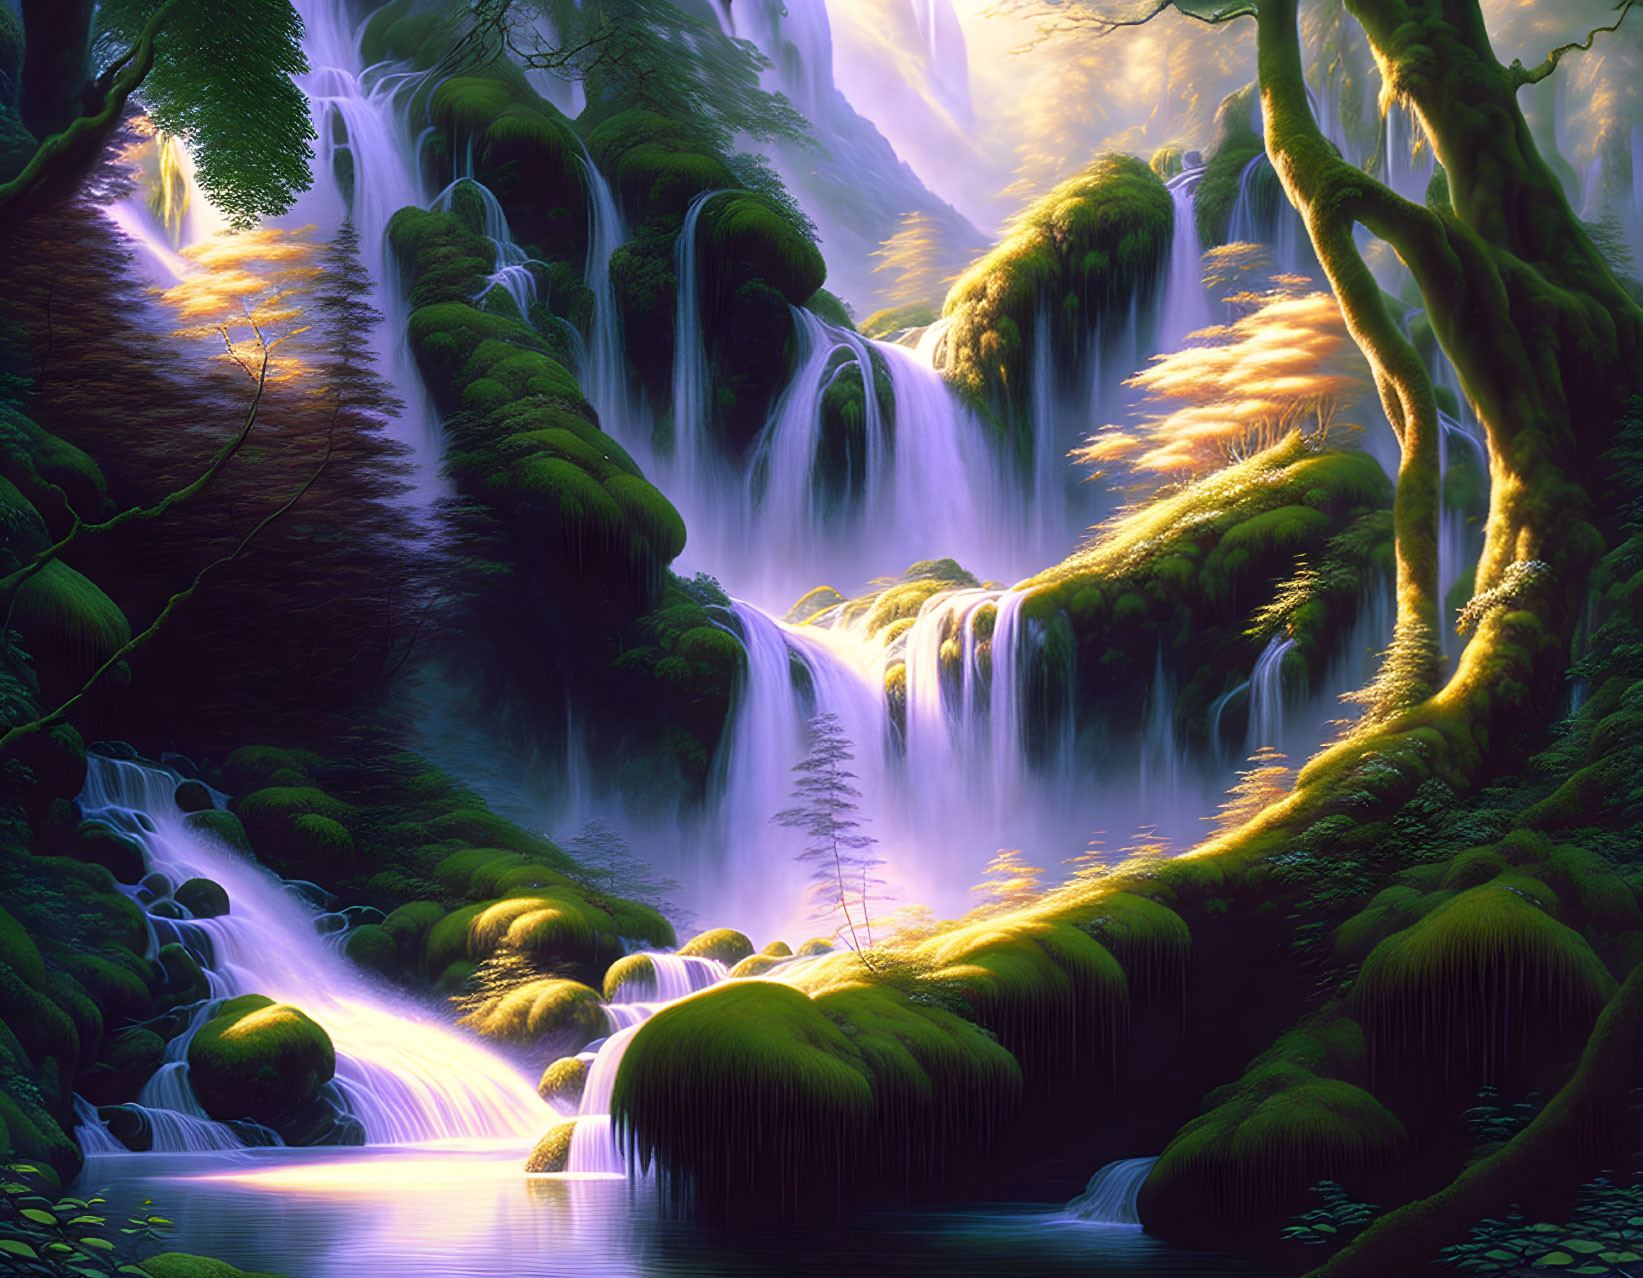 Enchanting forest scene with waterfalls, greenery, moss-covered rocks, and ethereal light